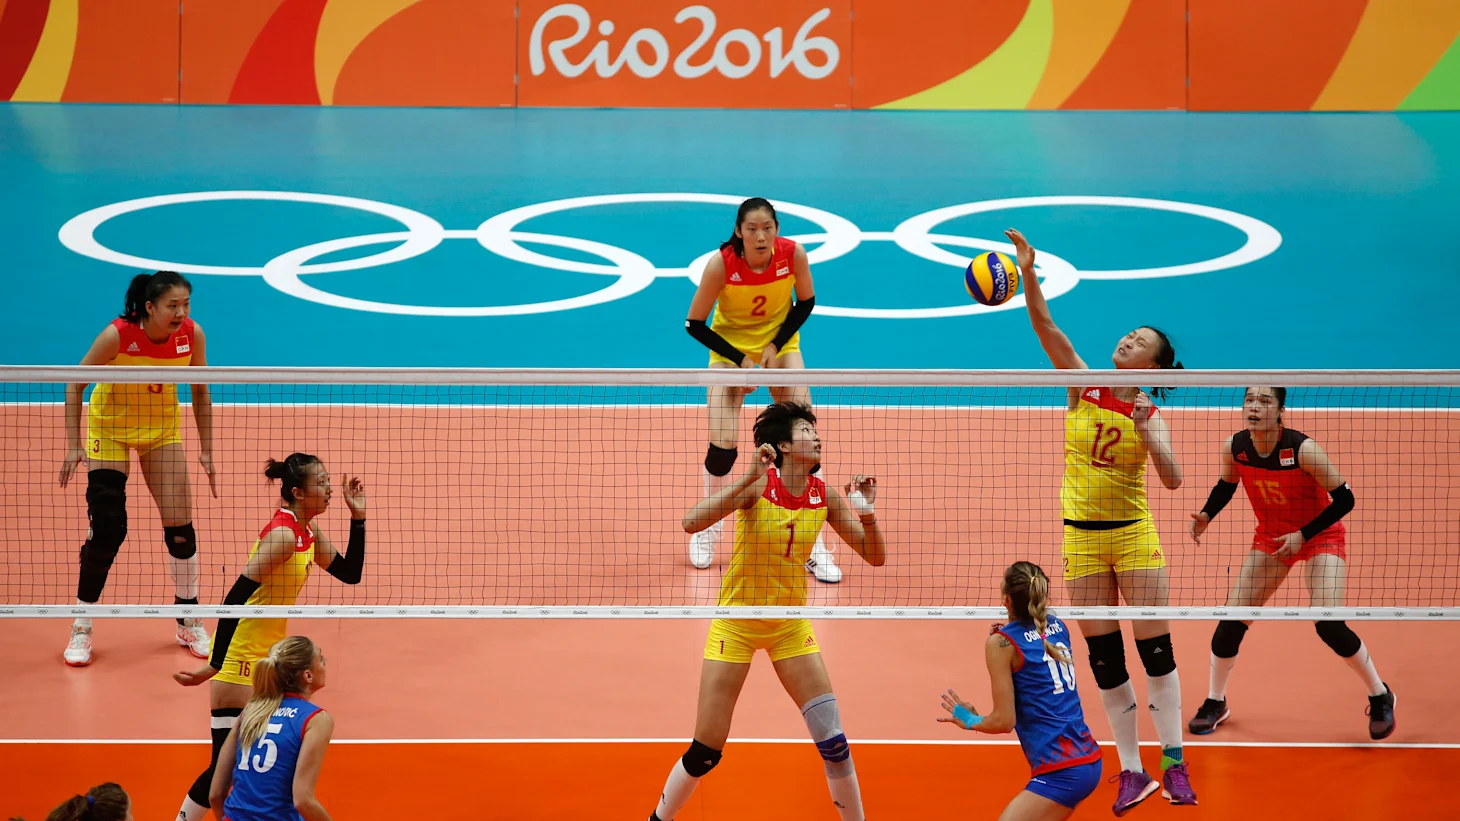 The Evolution of Volleyball: From Beaches to Olympics